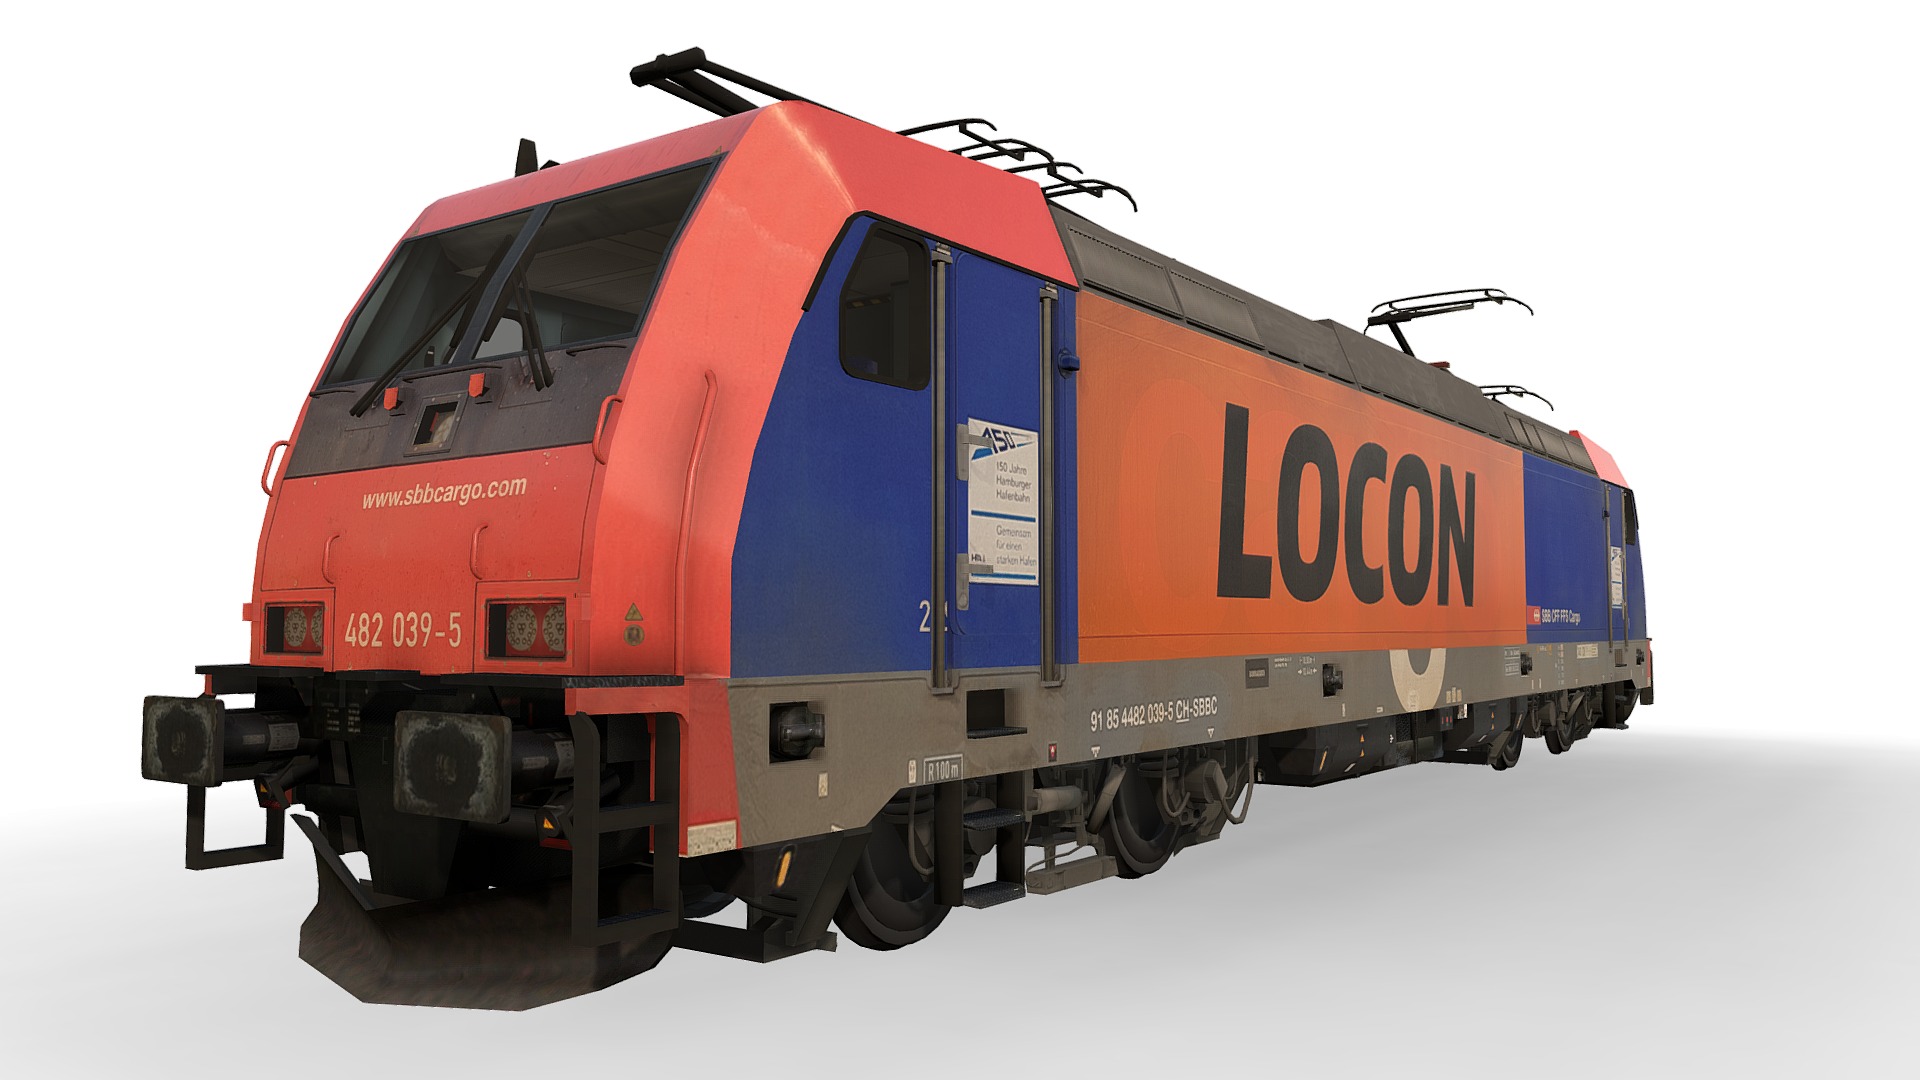 3D model Locomotive Class 185 – RE482 039-5 – SBB / LOCON - This is a 3D model of the Locomotive Class 185 - RE482 039-5 - SBB / LOCON. The 3D model is about a red train on a track.